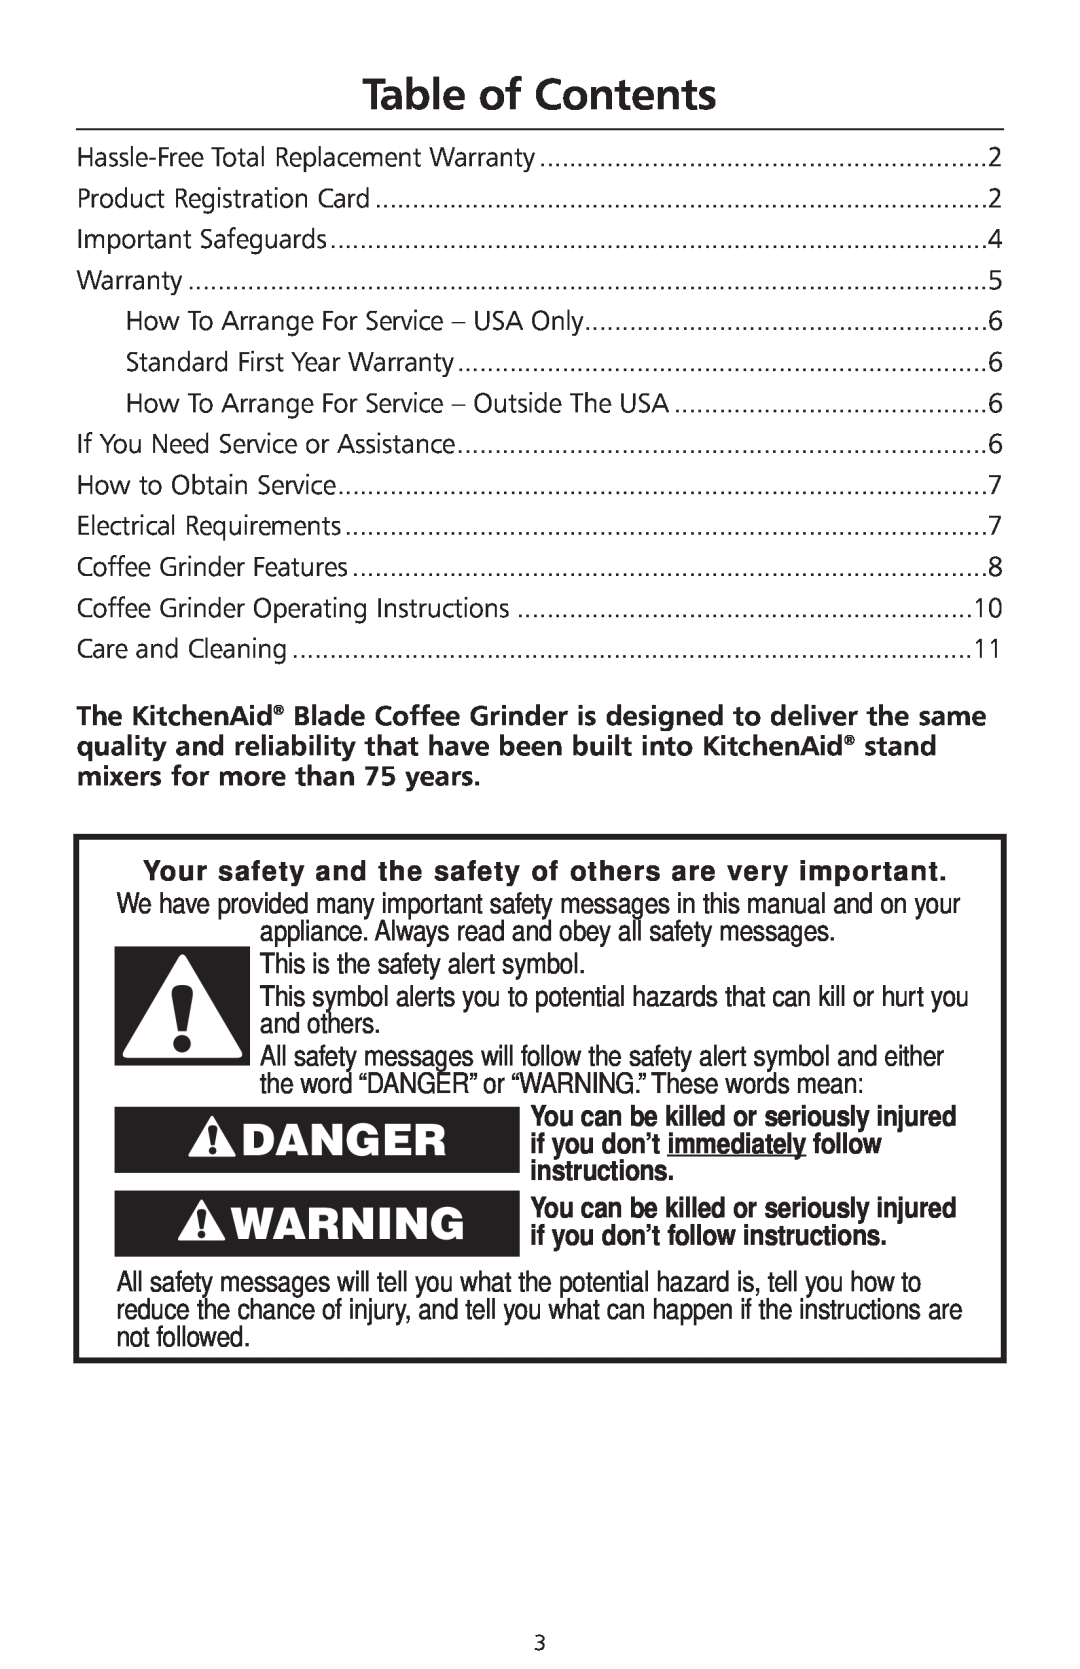 KitchenAid 2633 Table of Contents, Danger, This is the safety alert symbol, and others, if you don’t immediately follow 